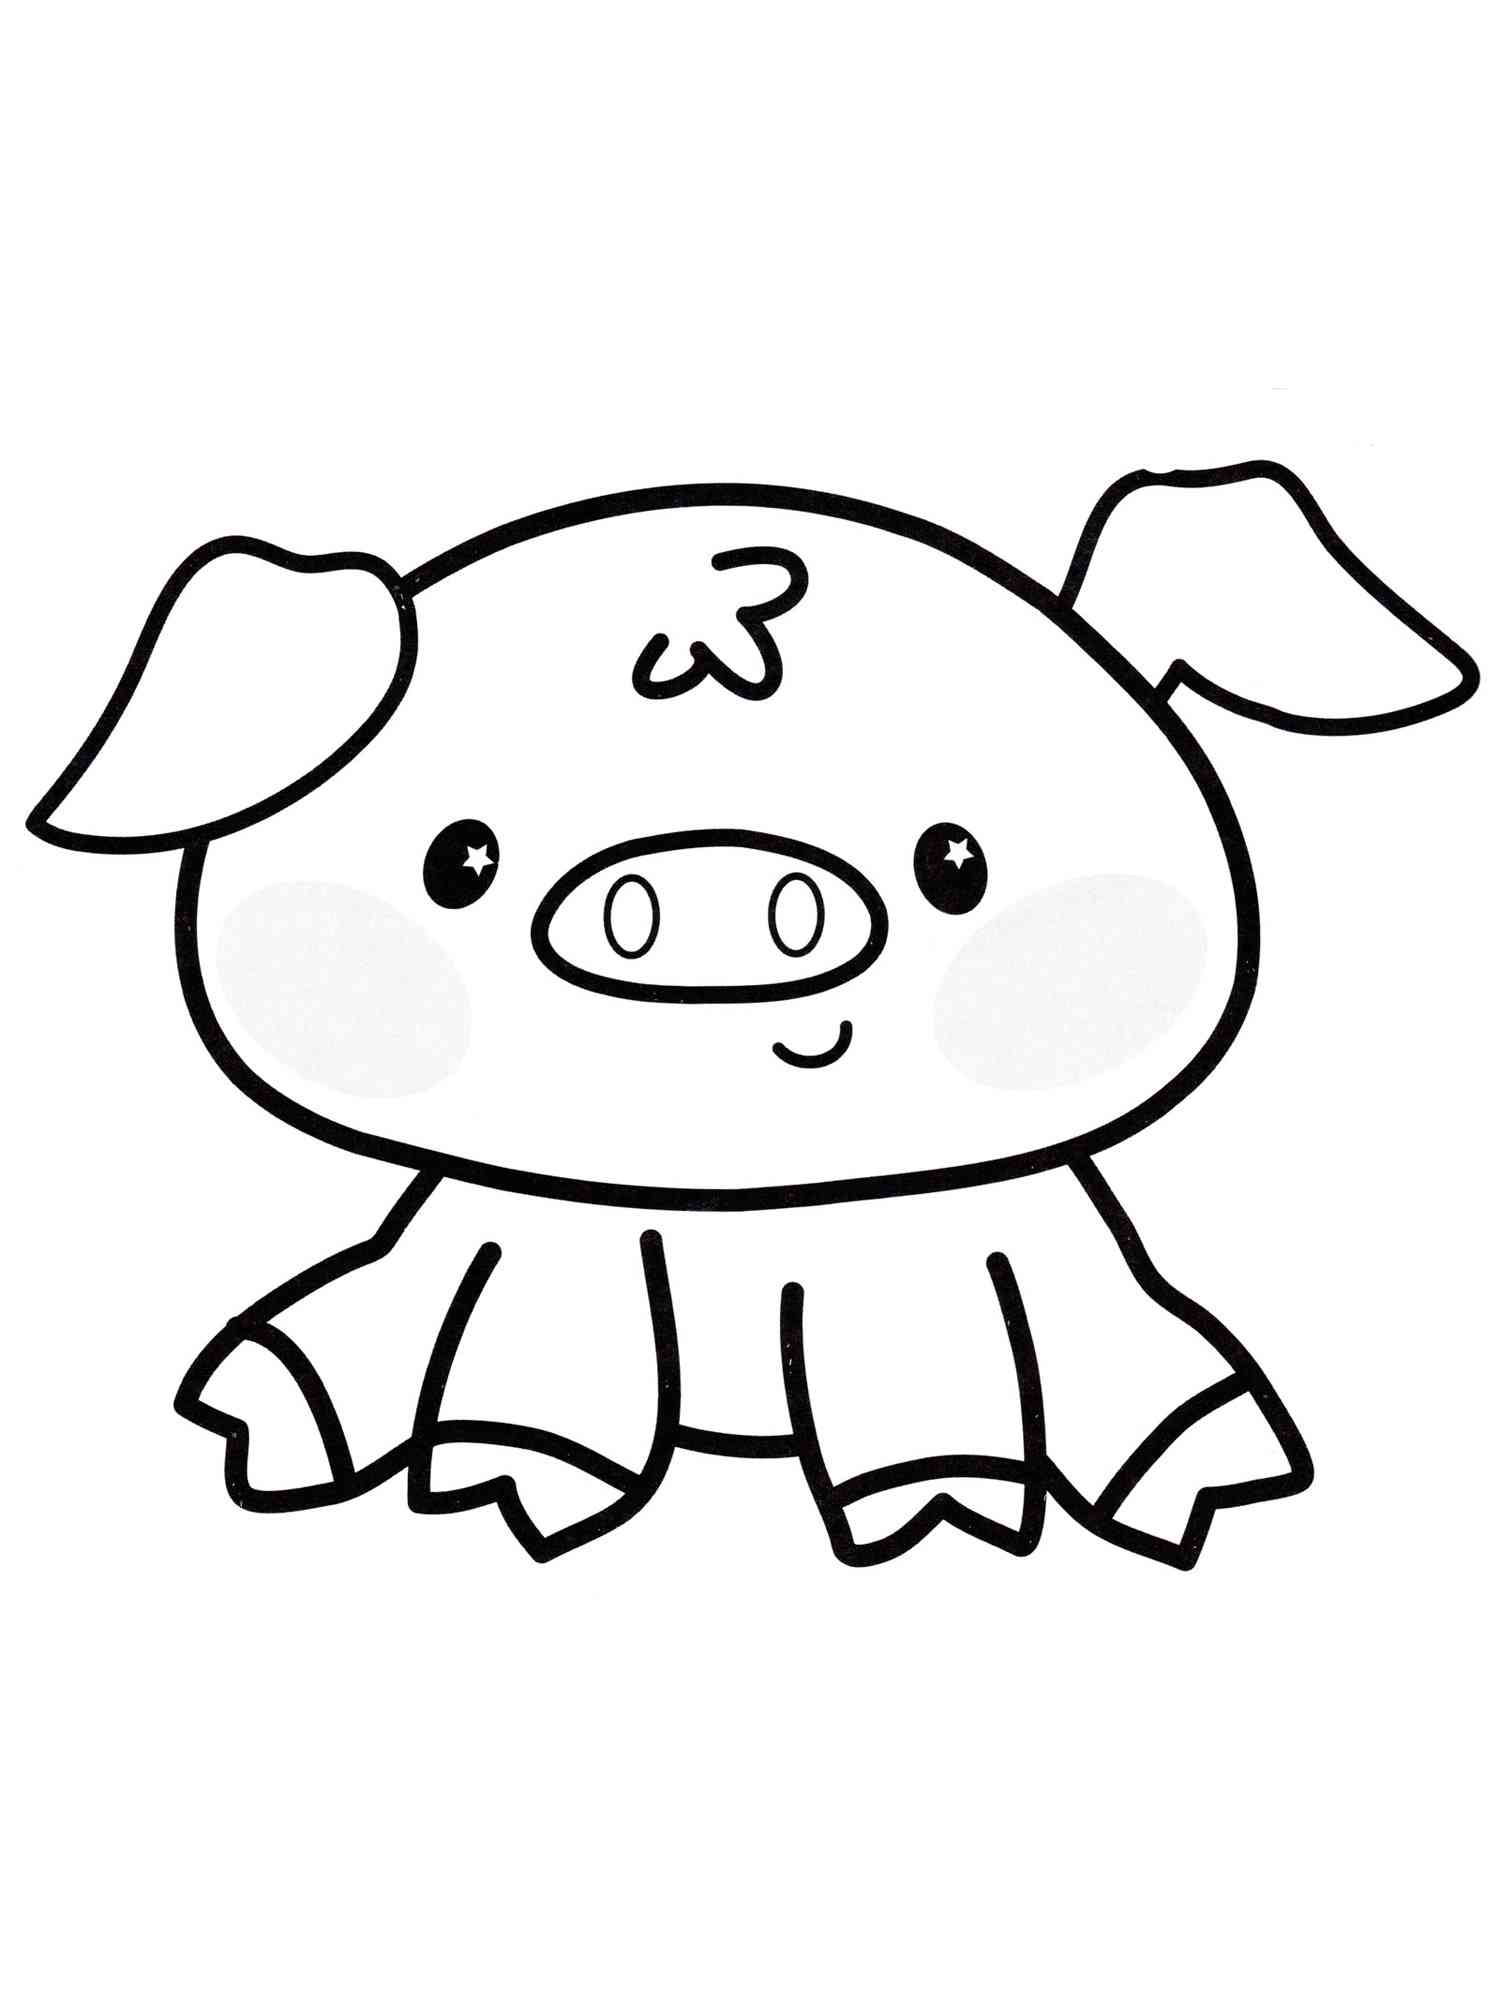 Cute Baby Pig coloring page